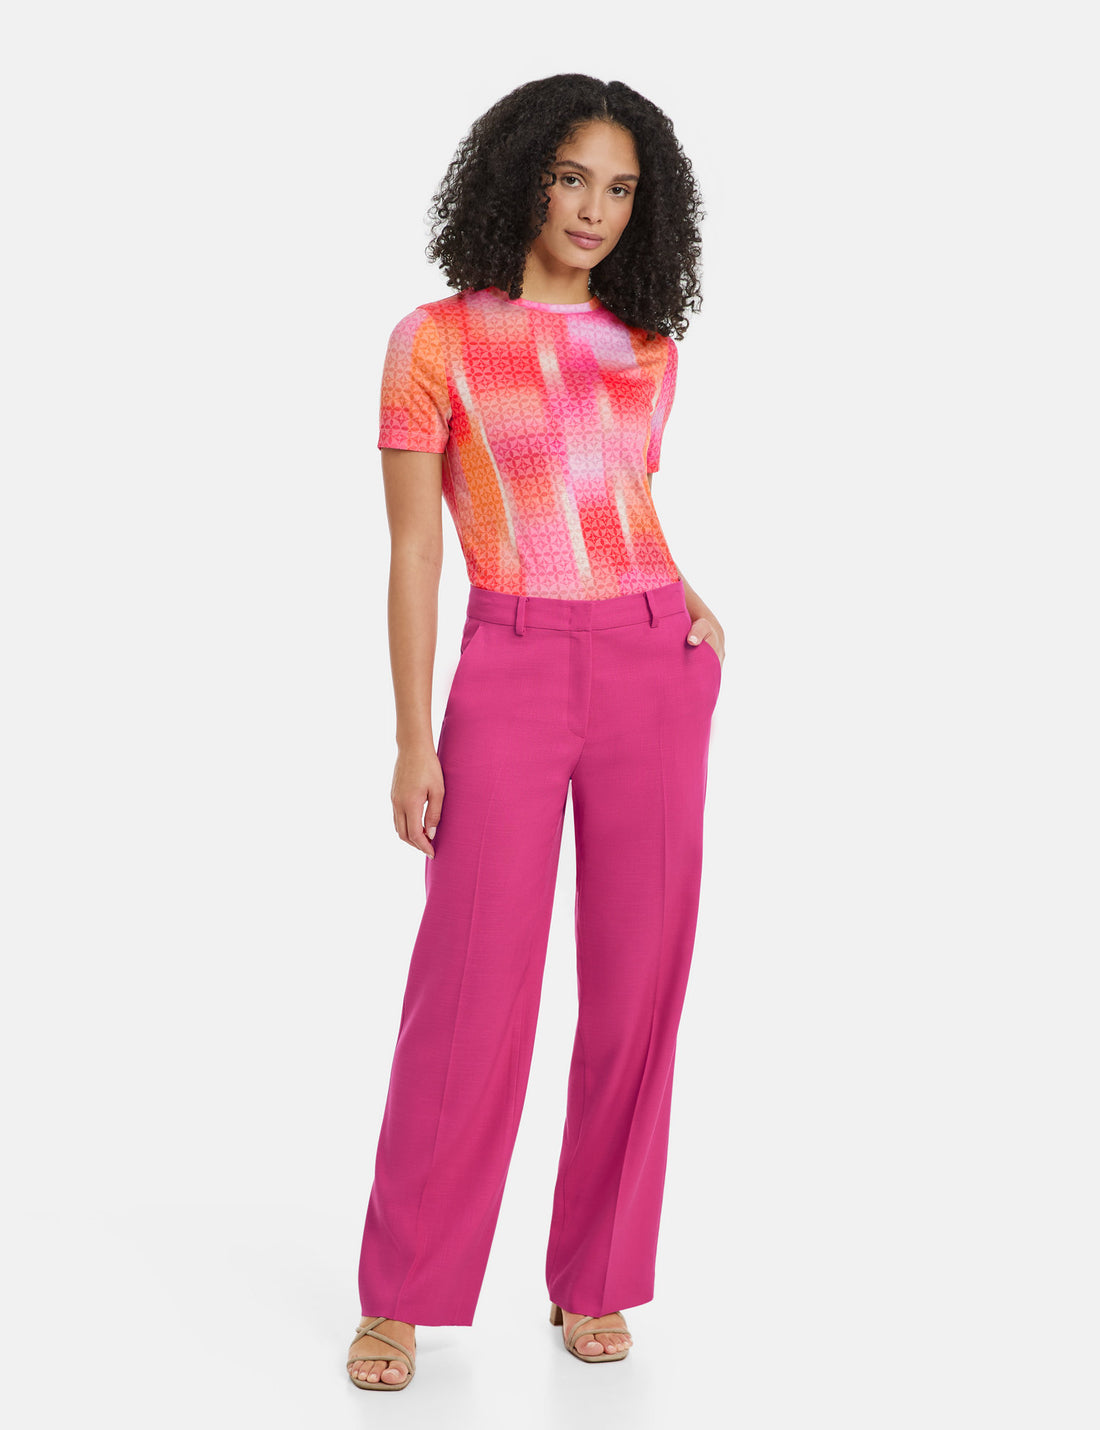 Elegant Trousers With Pressed Pleats_320034-31279_30913_01